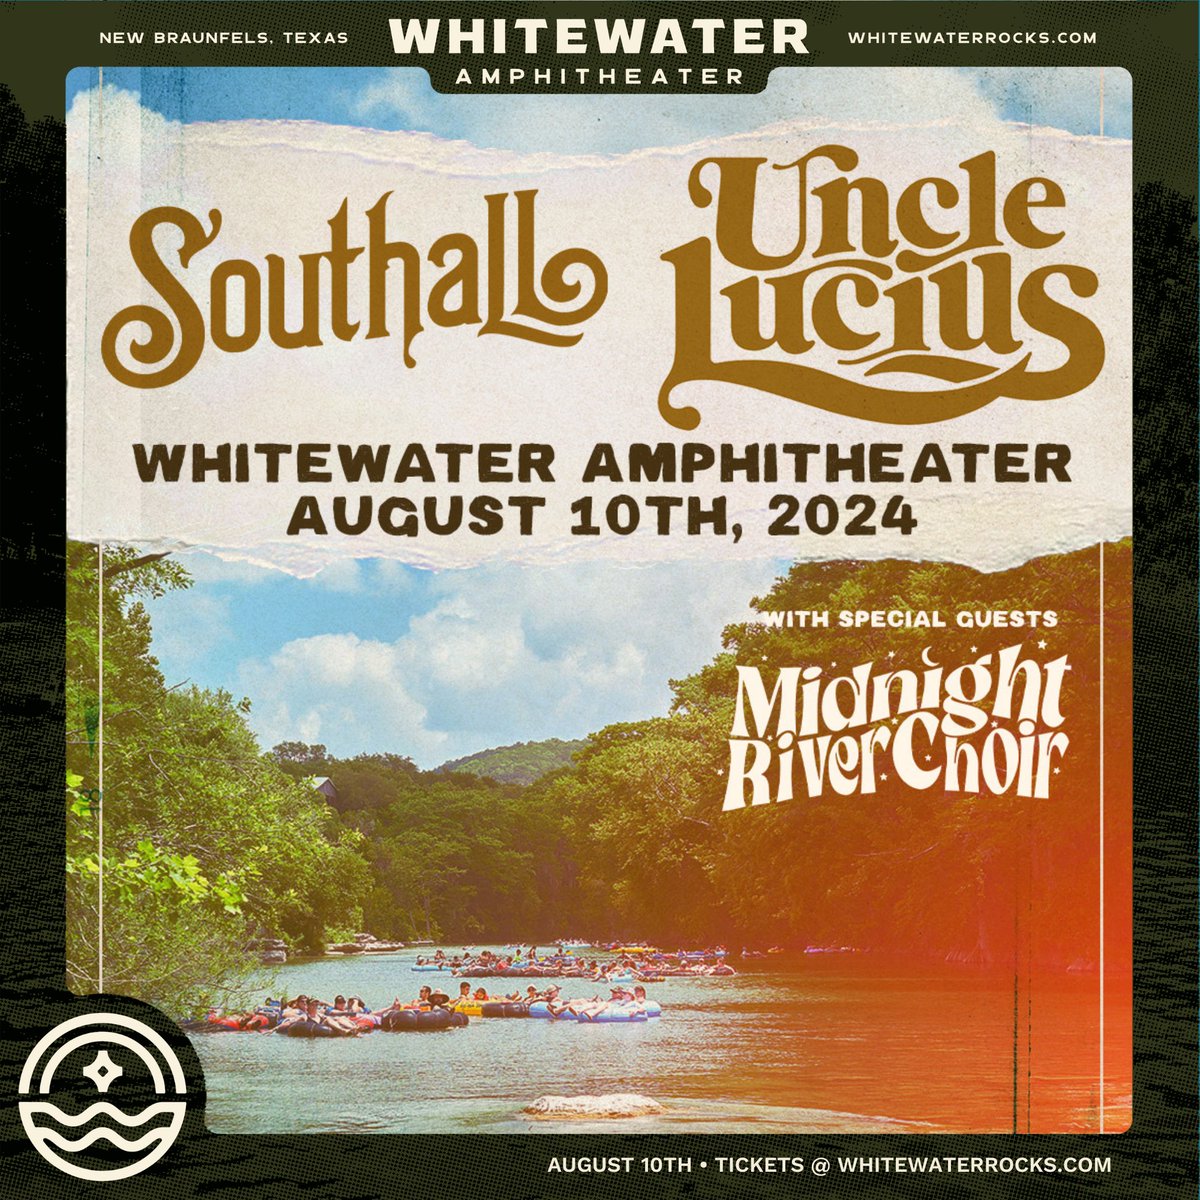 📣Just announced!!! @ReadSouthall and @UncleLucius with special guest @12amRiverChoir on August 10th! Tickets on sale Friday at 10 am. *There is an 8 ticket limit per user #2024summer #southall #unclelucius #nbtx #ontheriverunderthestars